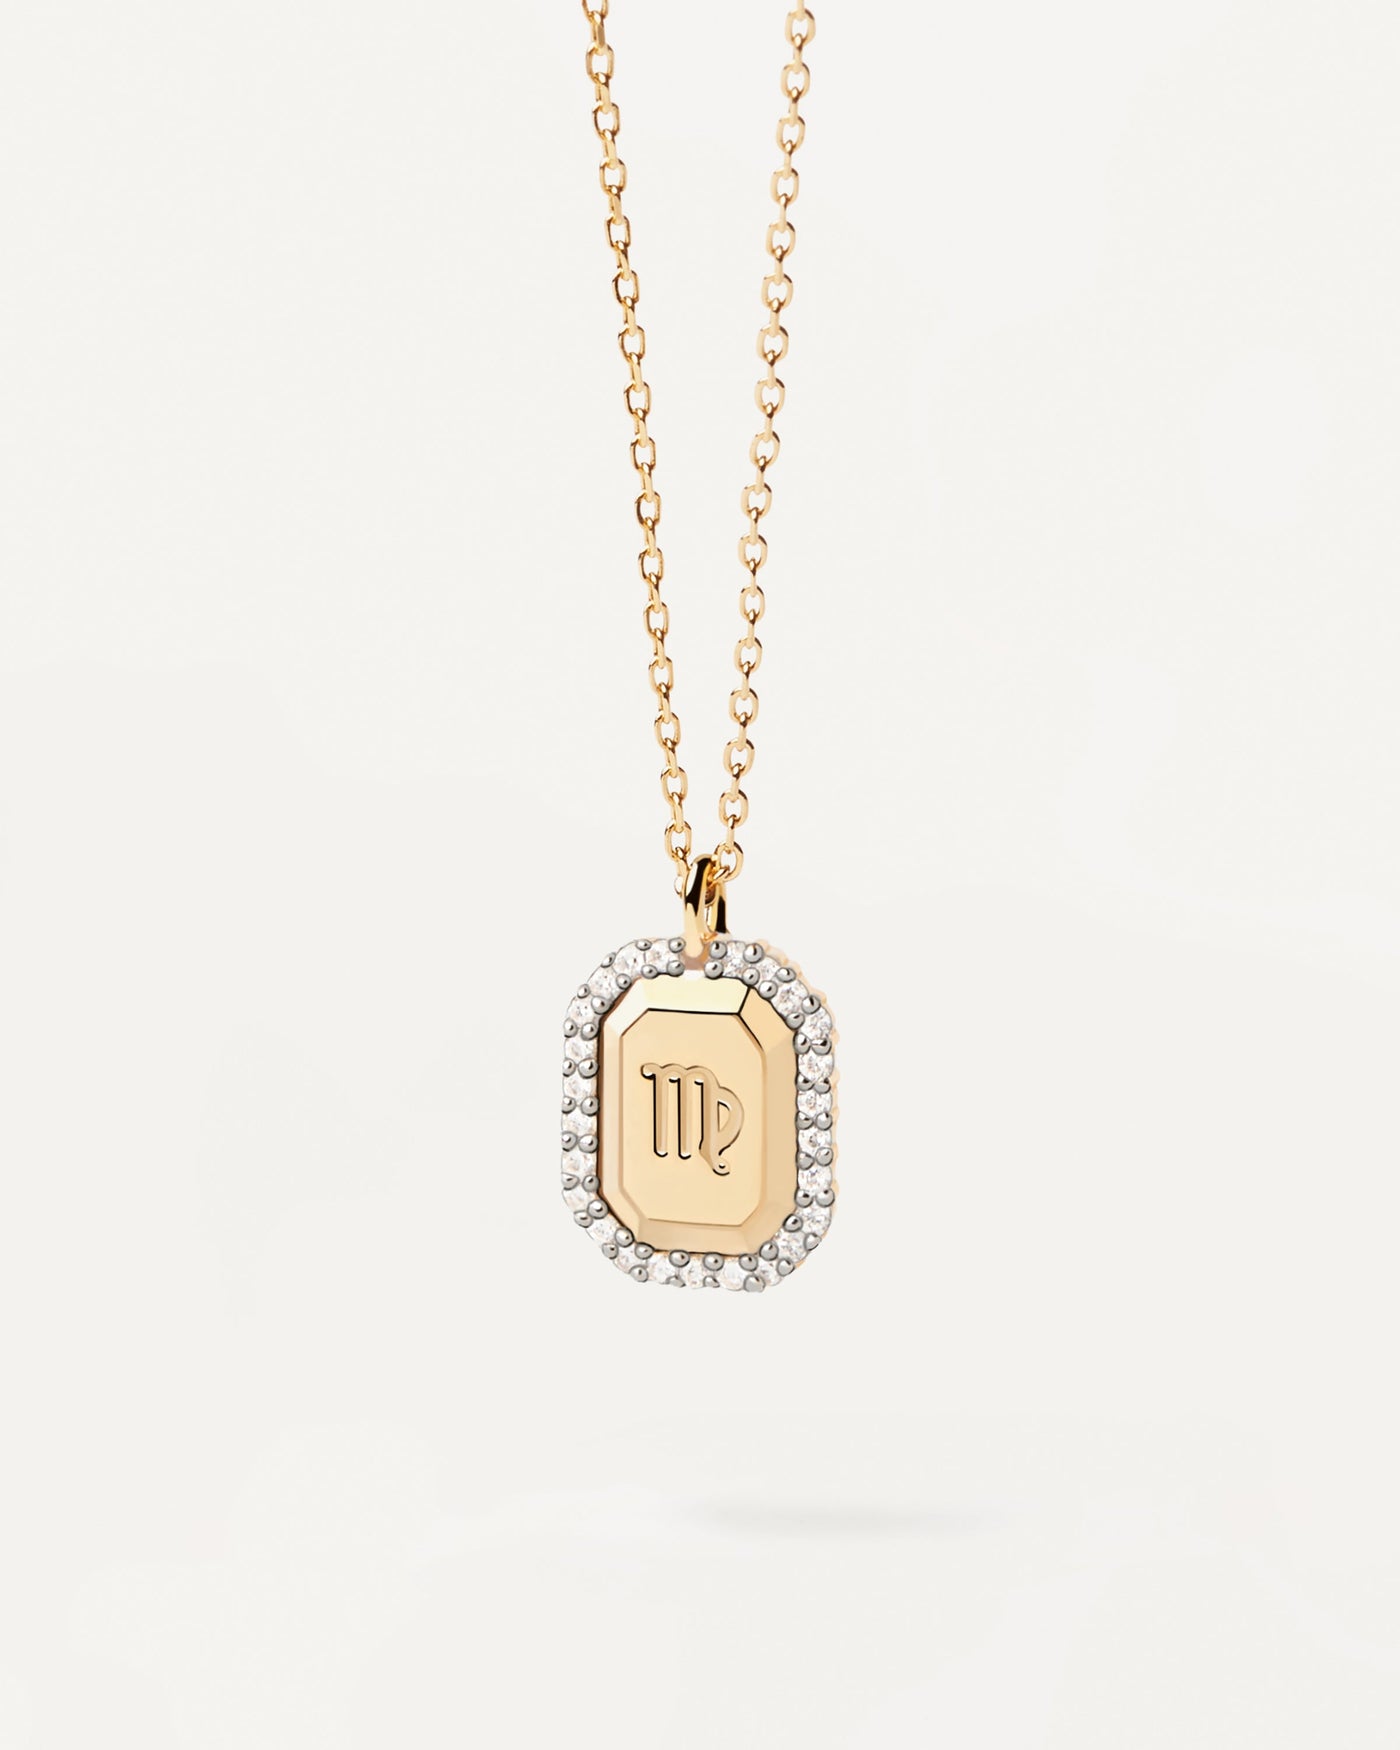 2023 Selection | Virgo Necklace. Gold-plated silver Virgo constellation necklace in pendant with white zirconia. Get the latest arrival from PDPAOLA. Place your order safely and get this Best Seller. Free Shipping.